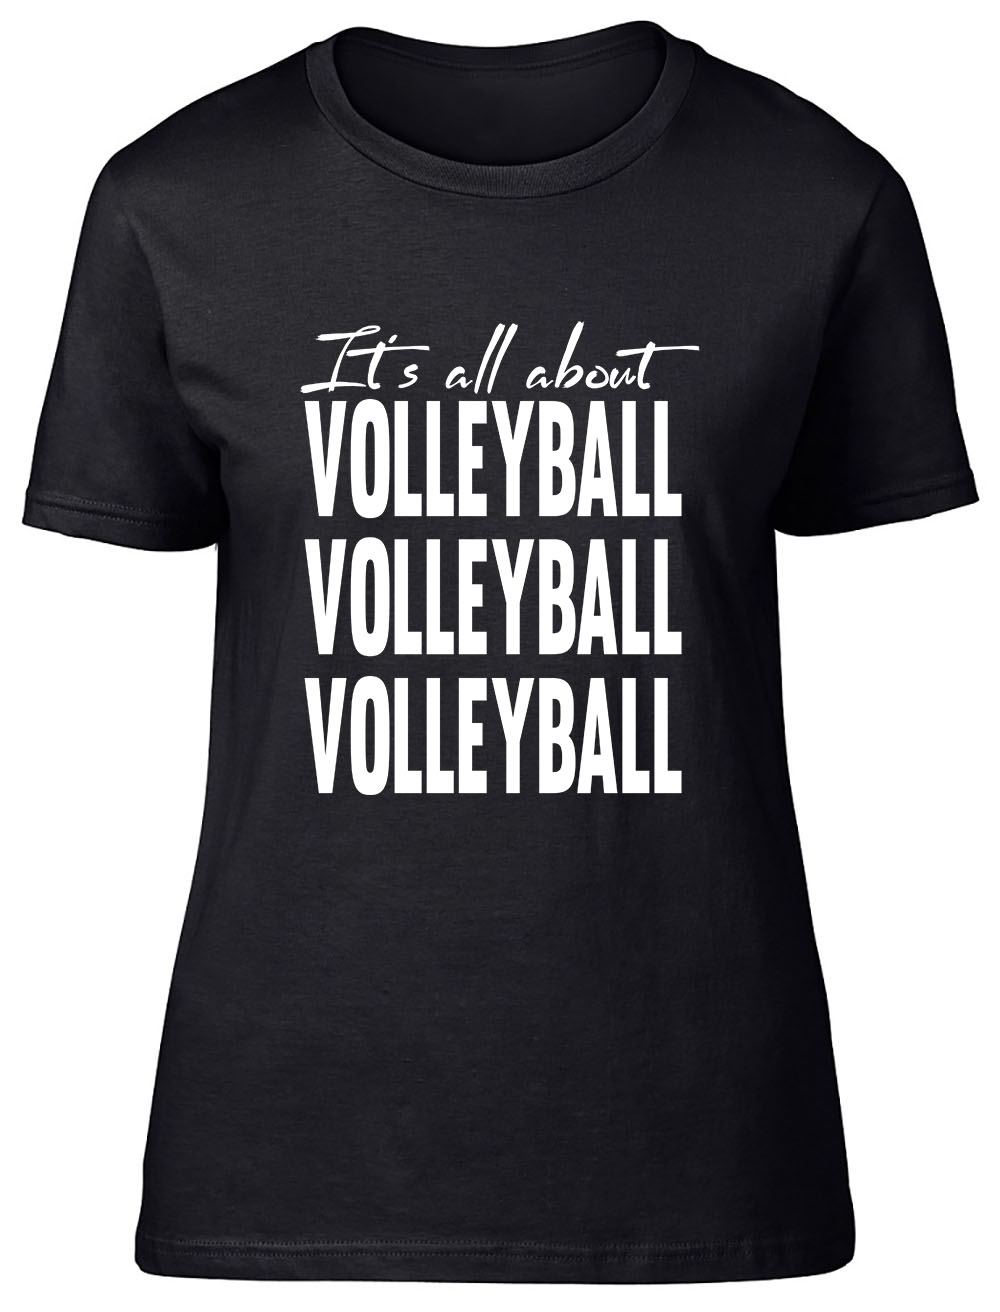 It's all about Volleyball Fitted Womens Ladies T Shirt | eBay